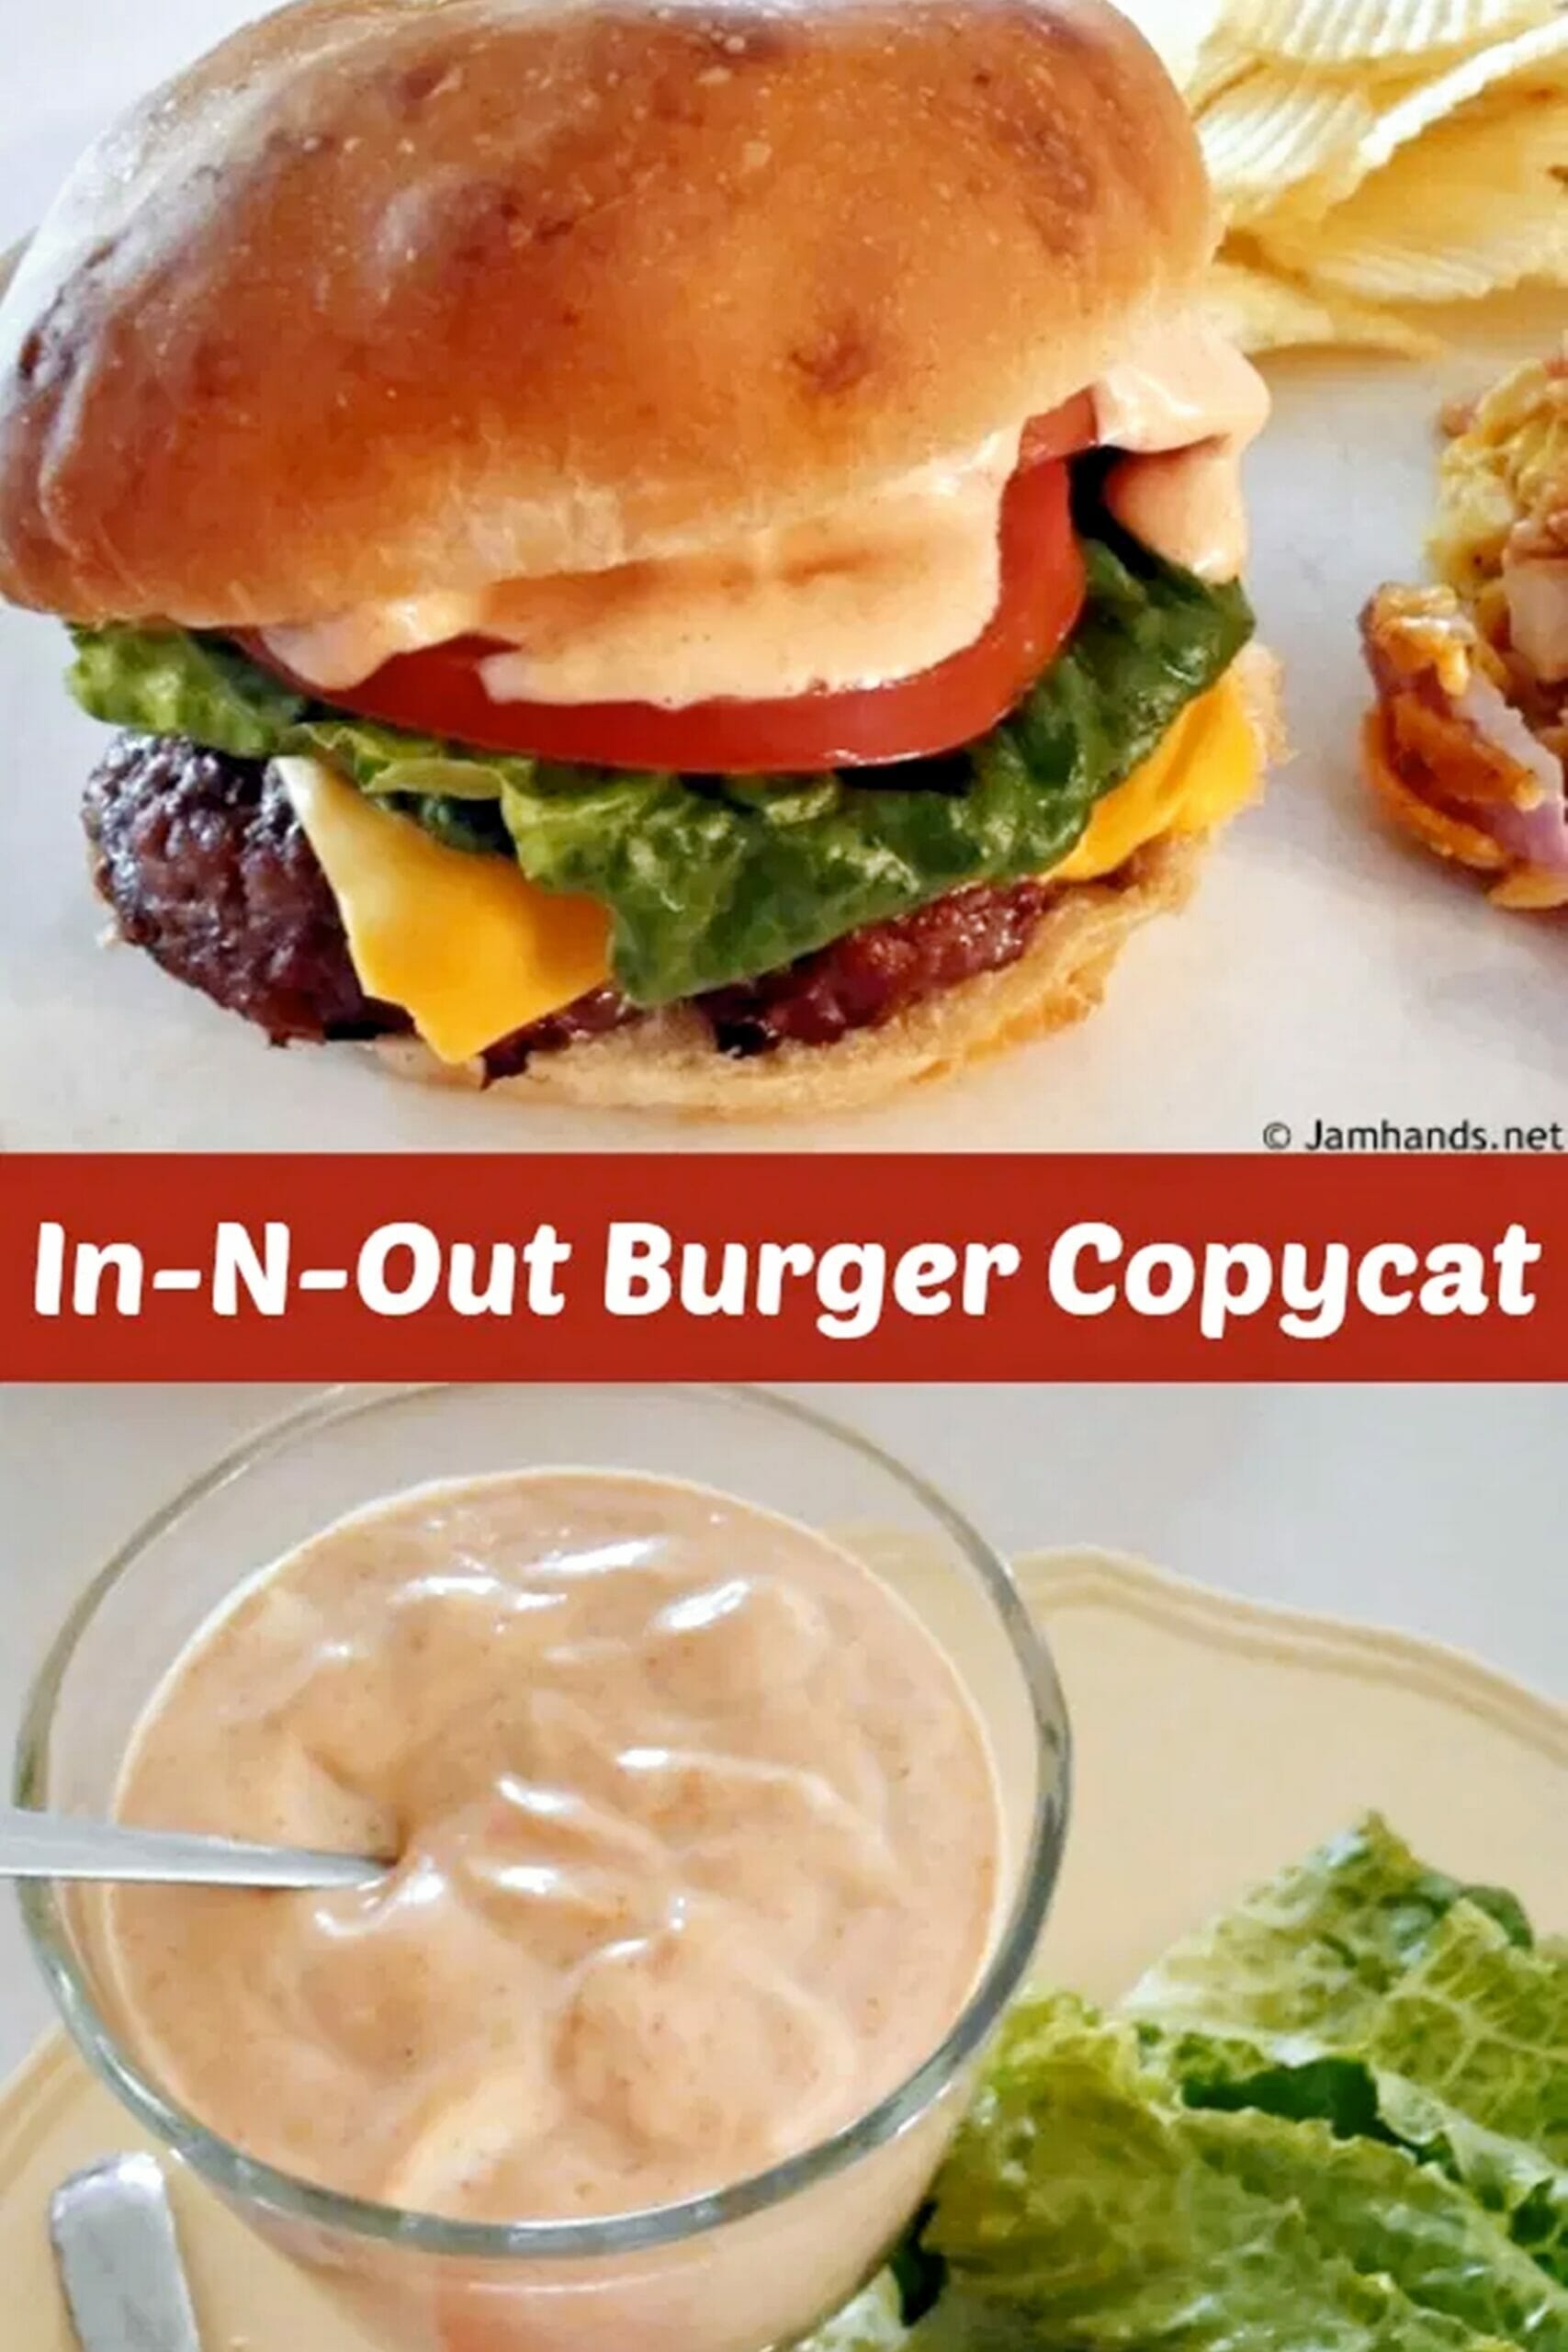 In-N-Out Cheeseburger Copycat